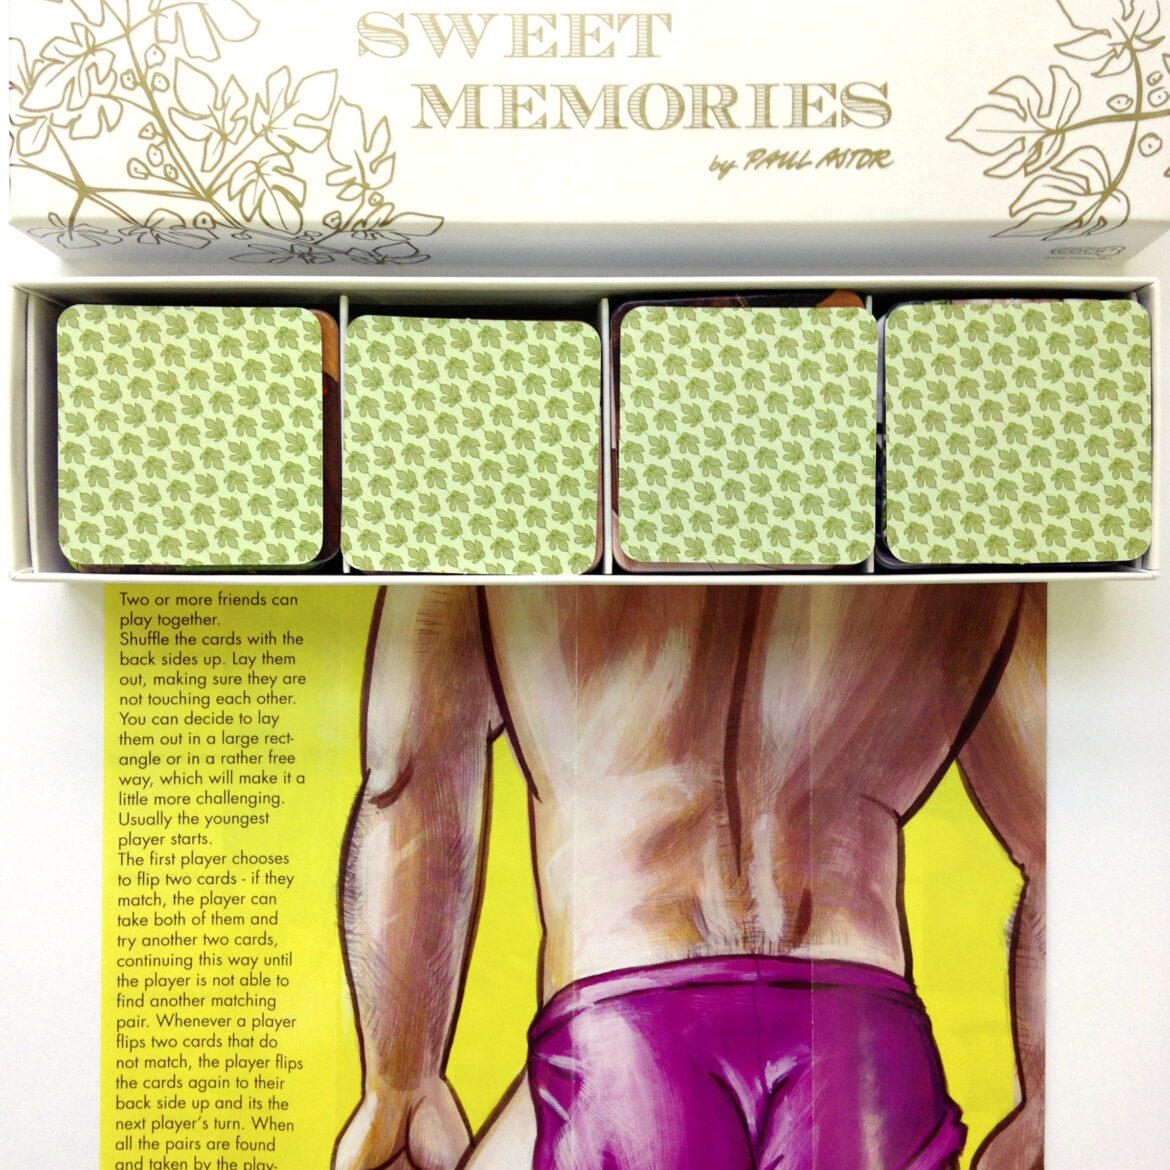 opened box and playing cards of the "Sweet Memories" memo game by Paul Astor Berlin